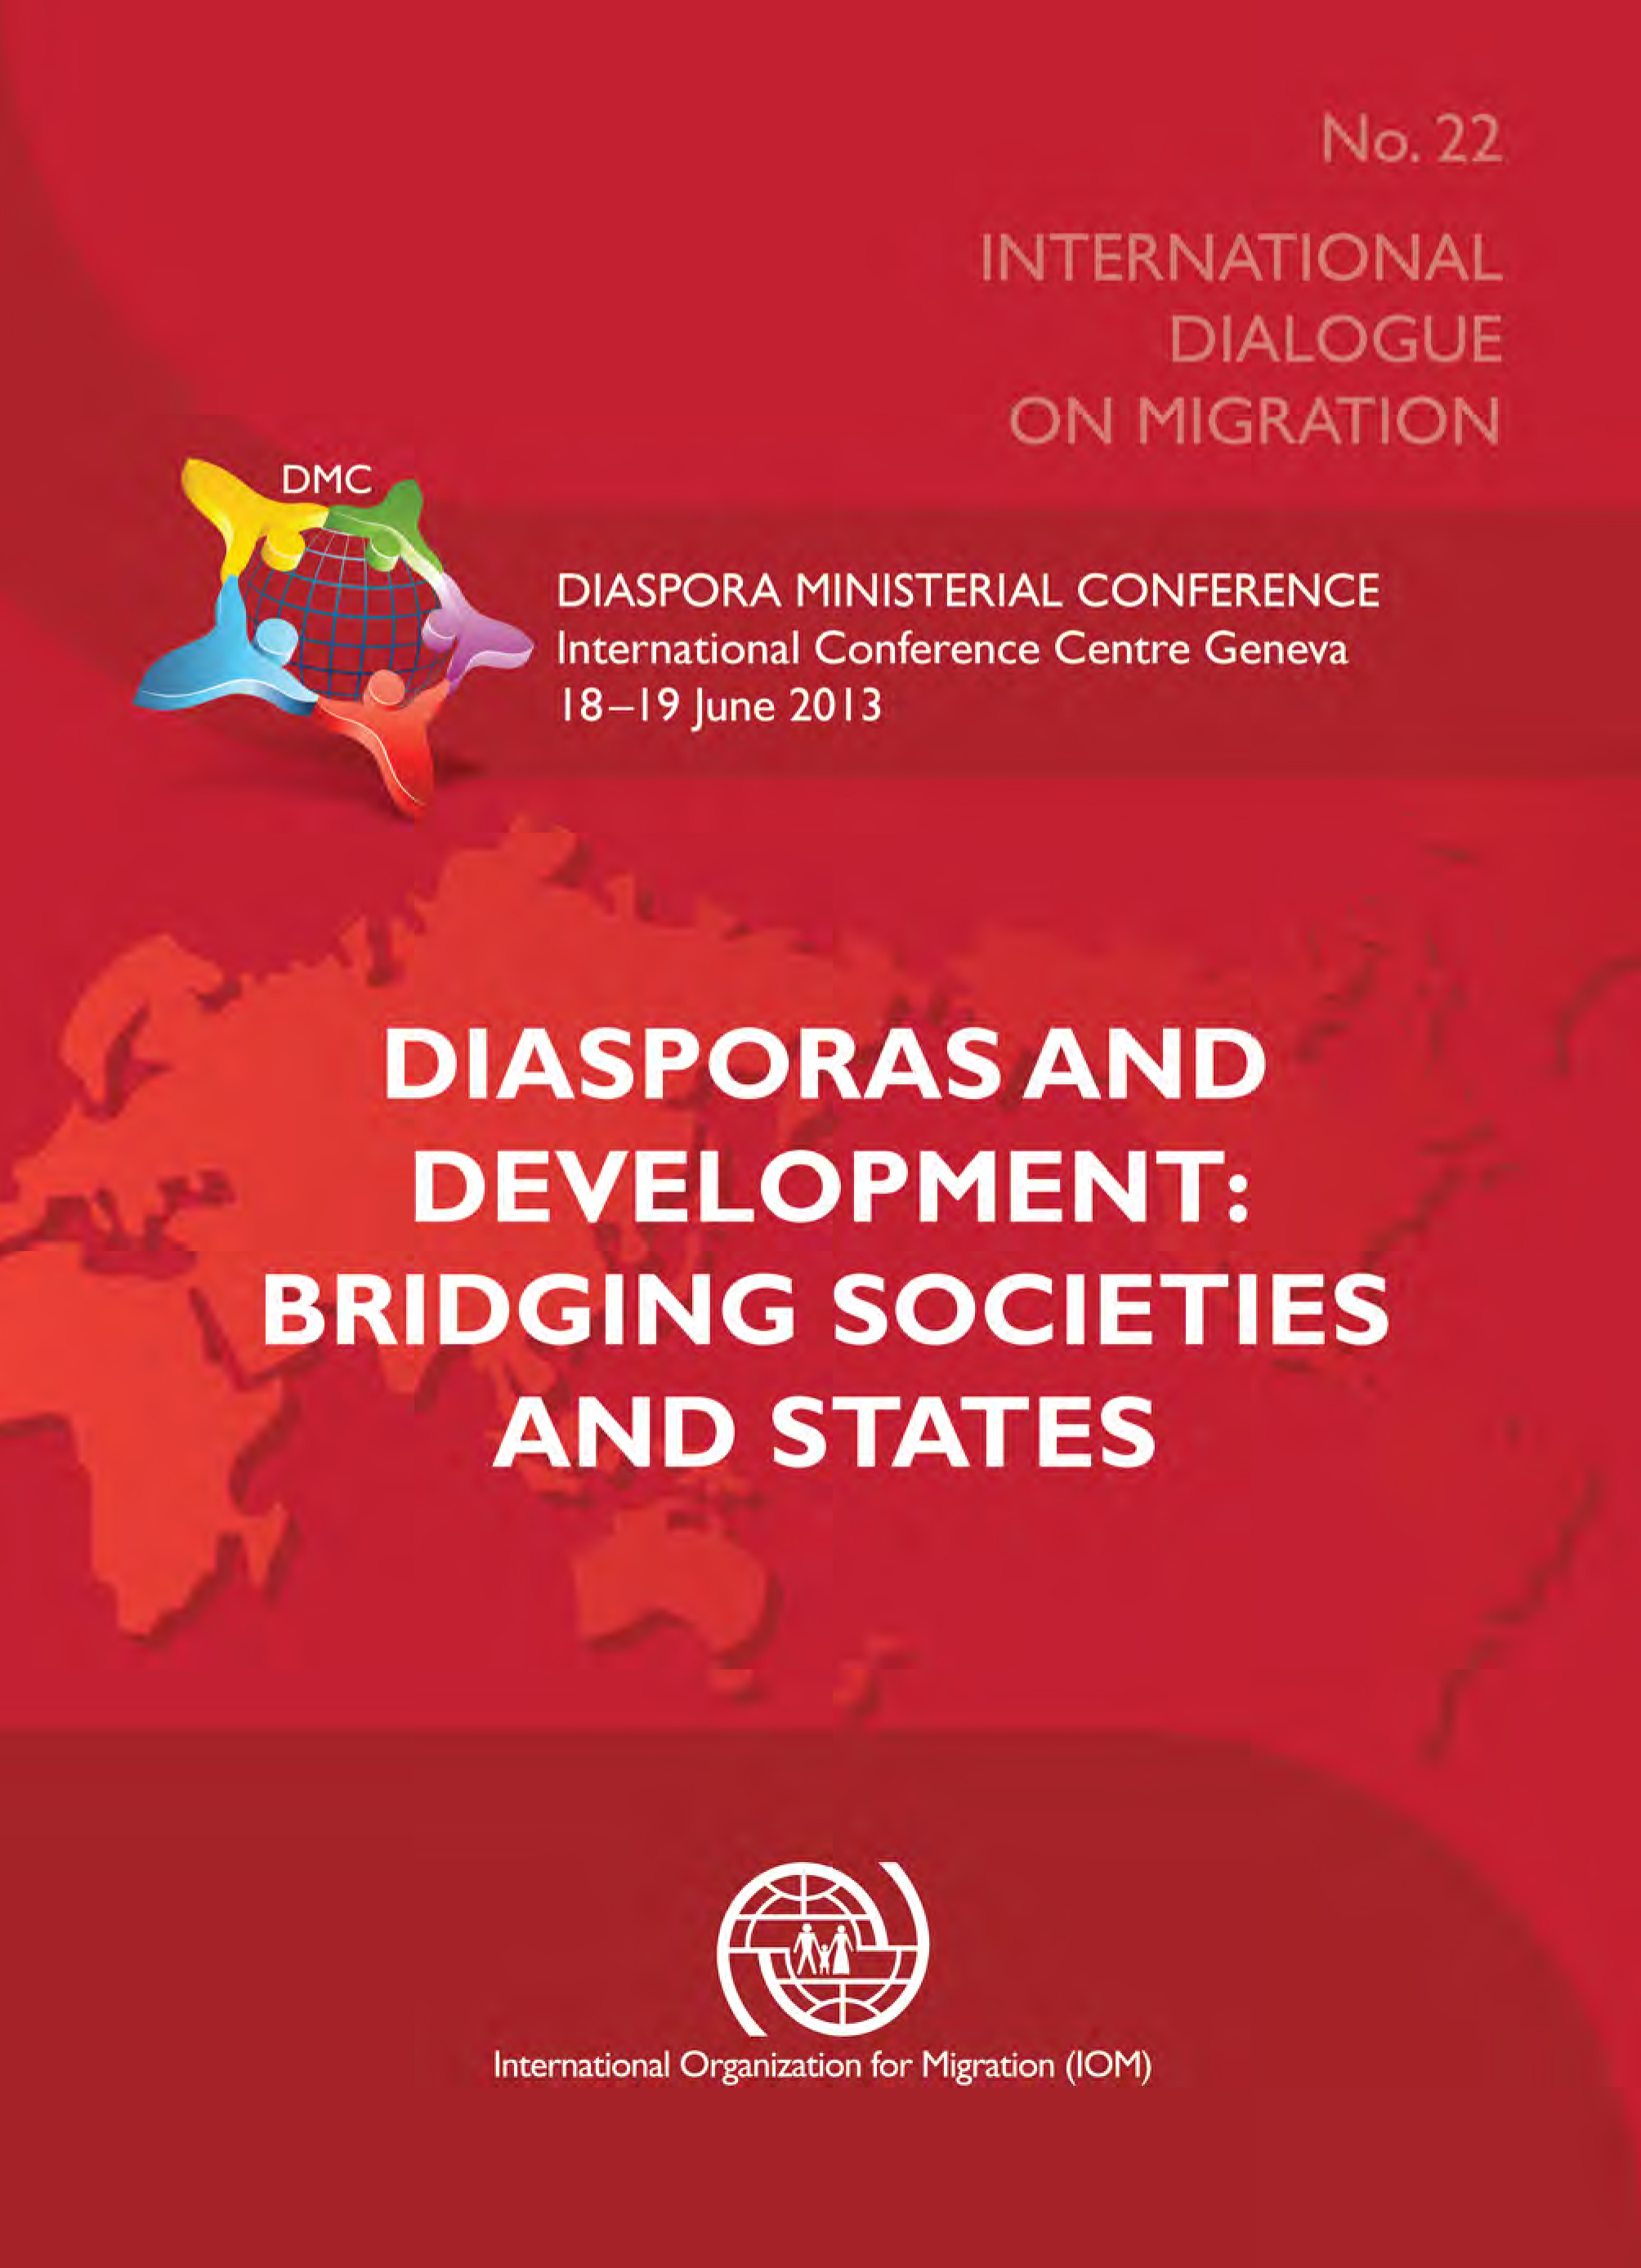 image of States can engage, enable and empower diasporas for development purposes through communication, outreach and partnership policies and actions